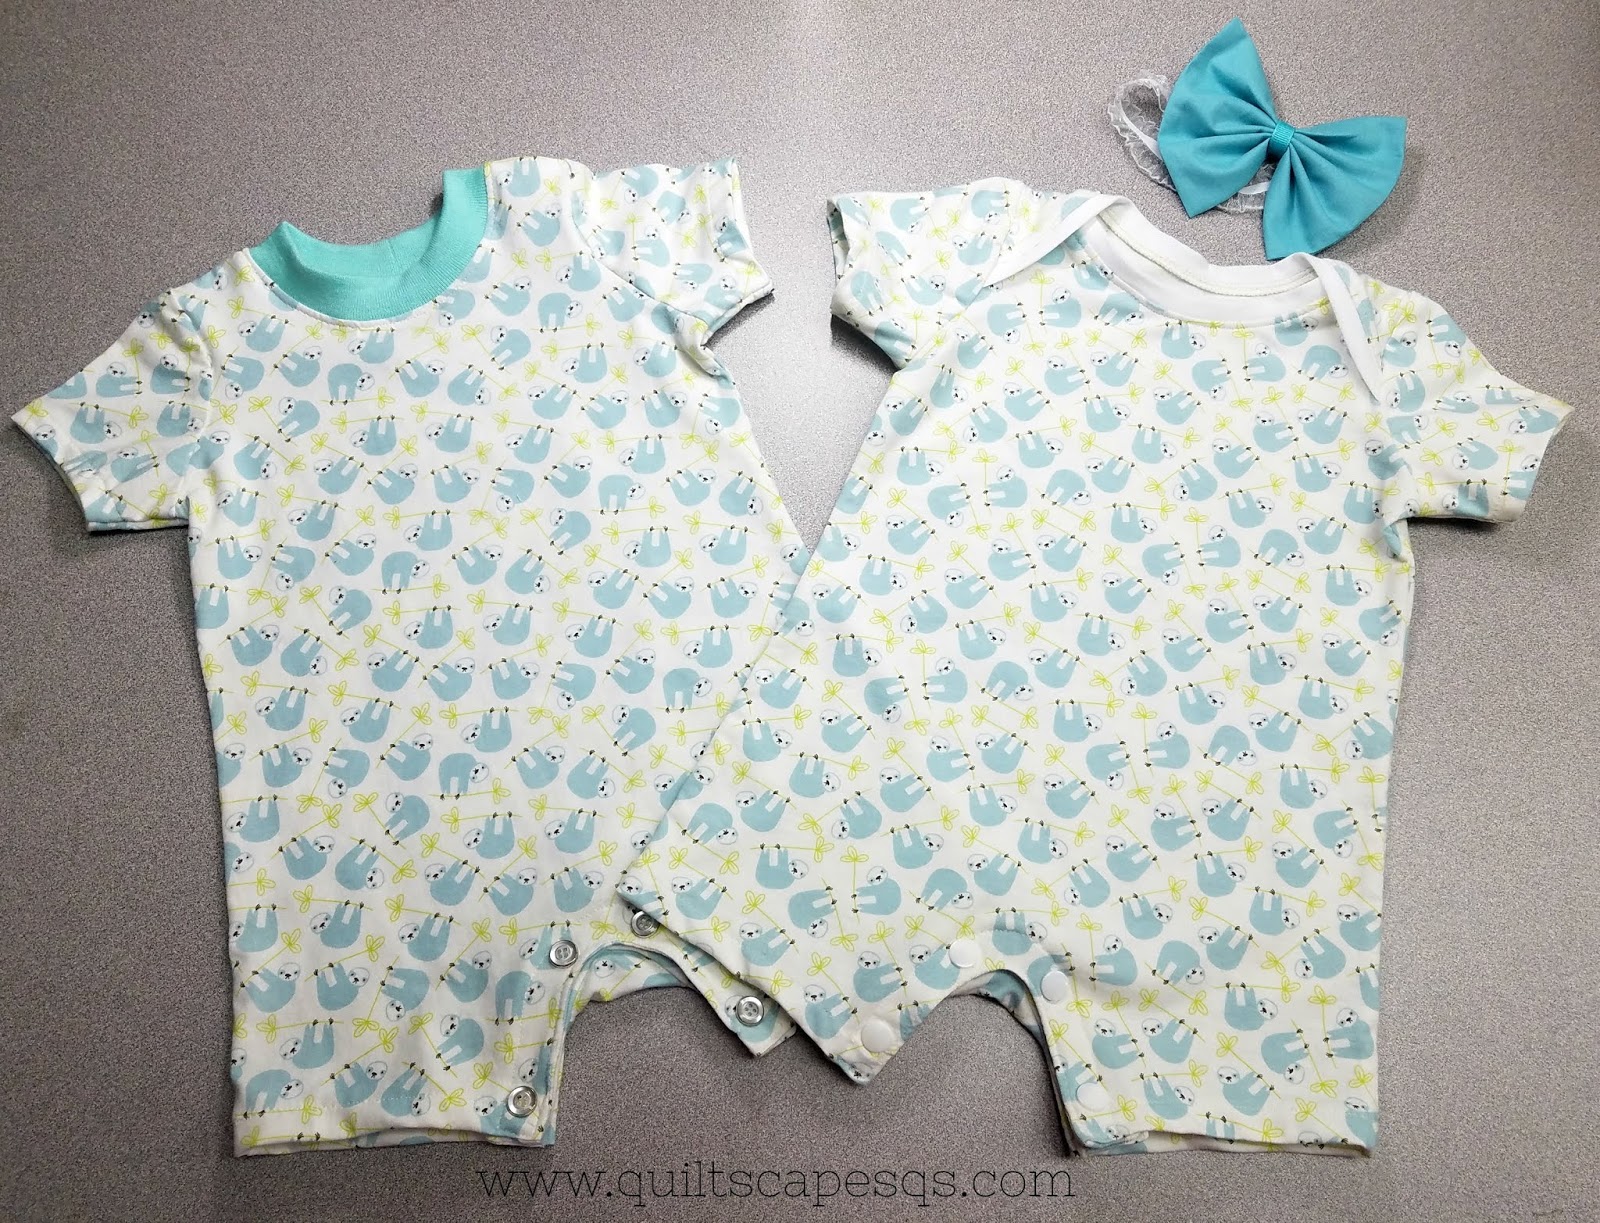 .Quiltscapes.: Baby Clothes ~ Sewing with Designer Knits!